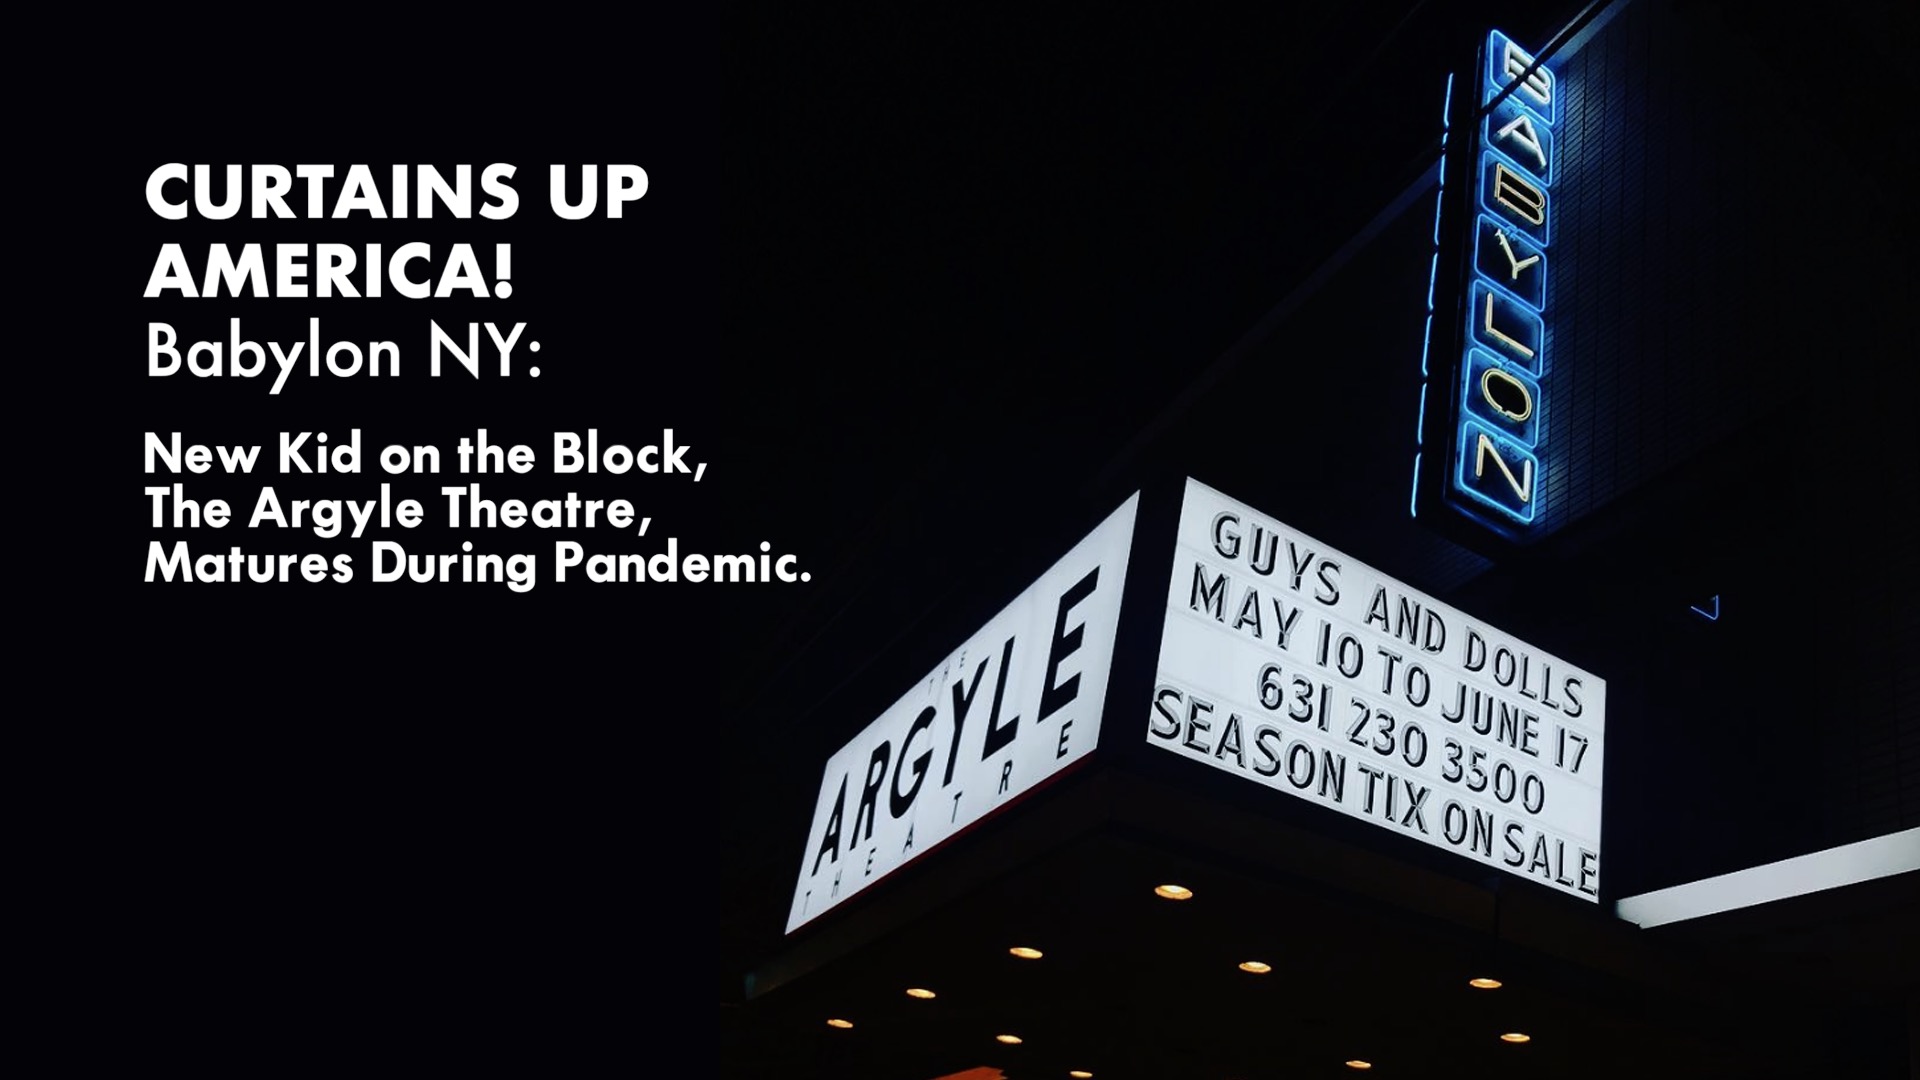 CURTAINS UP AMERICA! New Kid on the Block, The Argyle Theatre - Matures During Pandemic